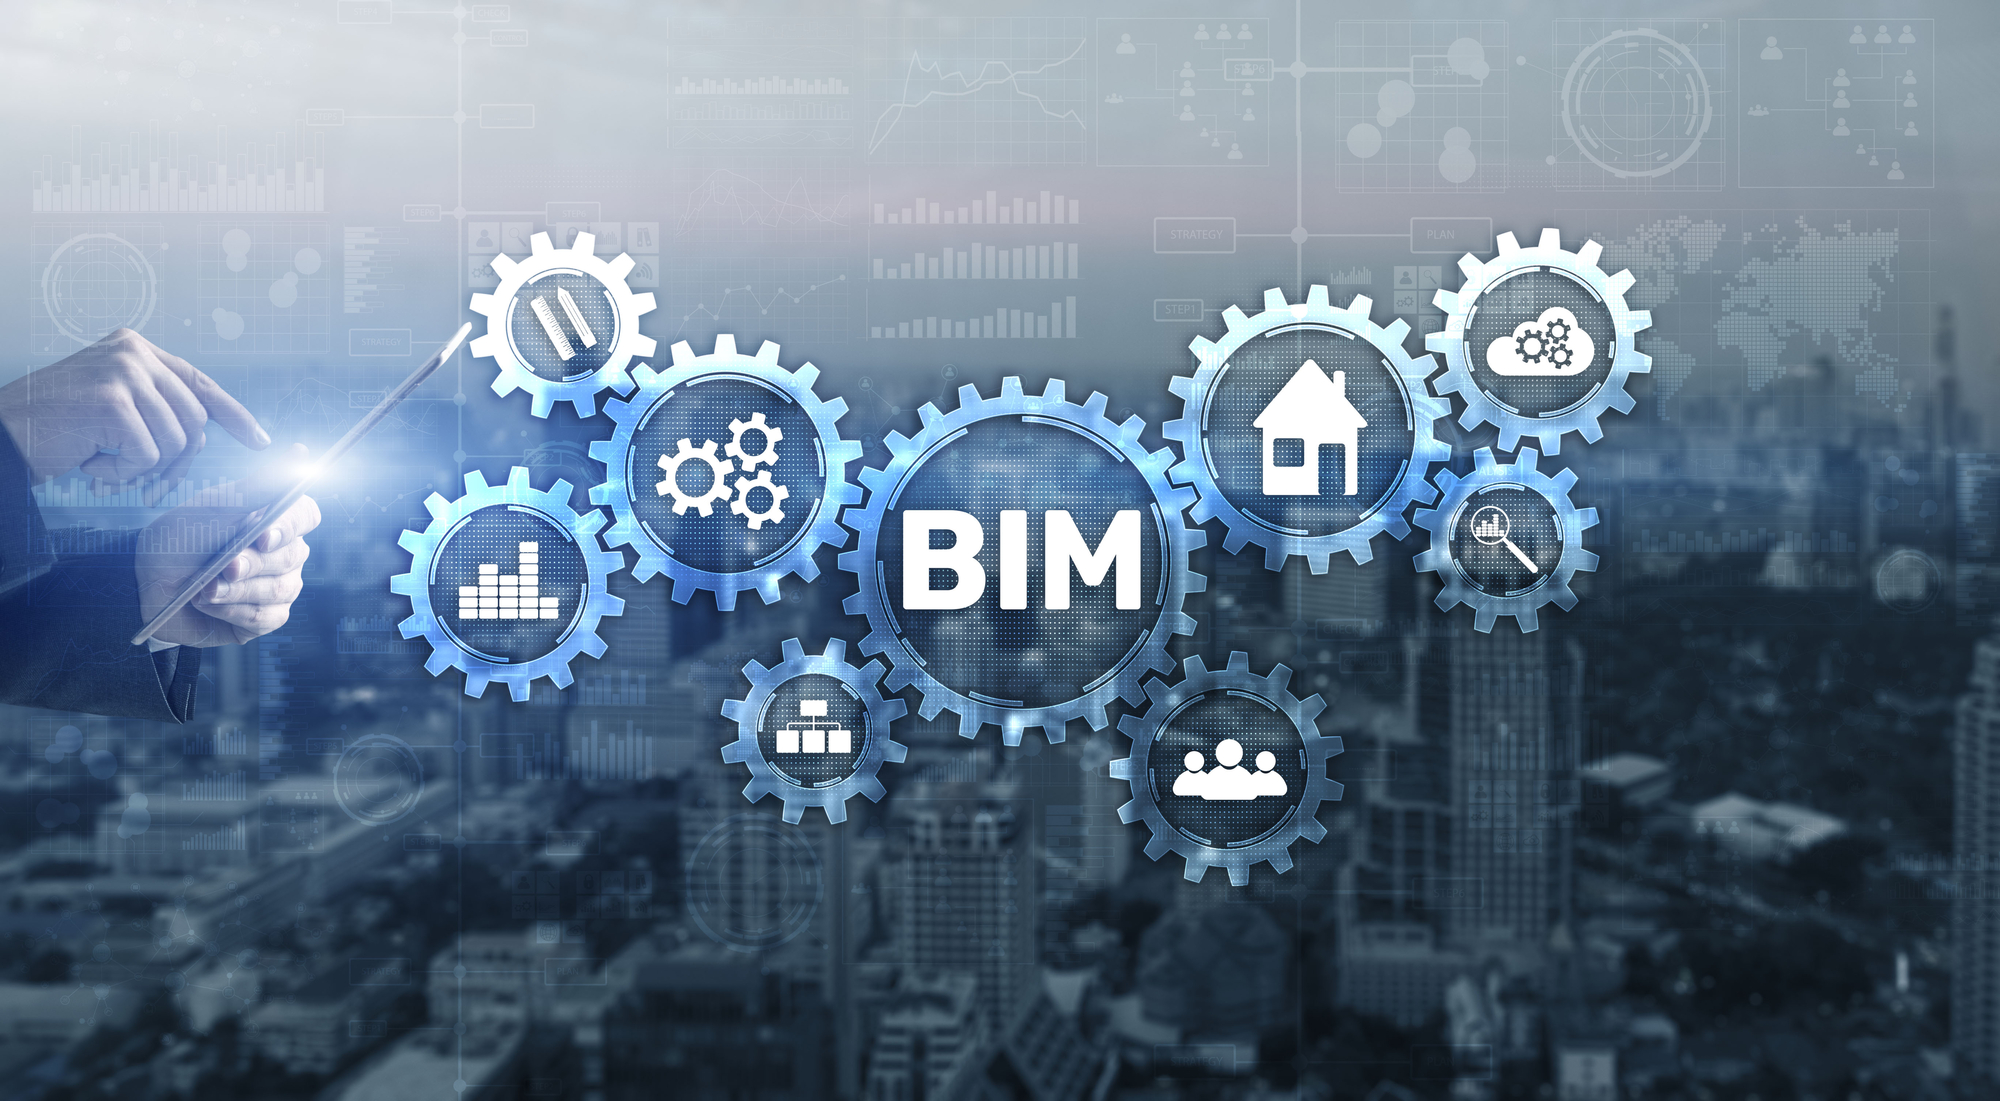 Cover photo of the article "Digitalization and BIM management: digital twins"